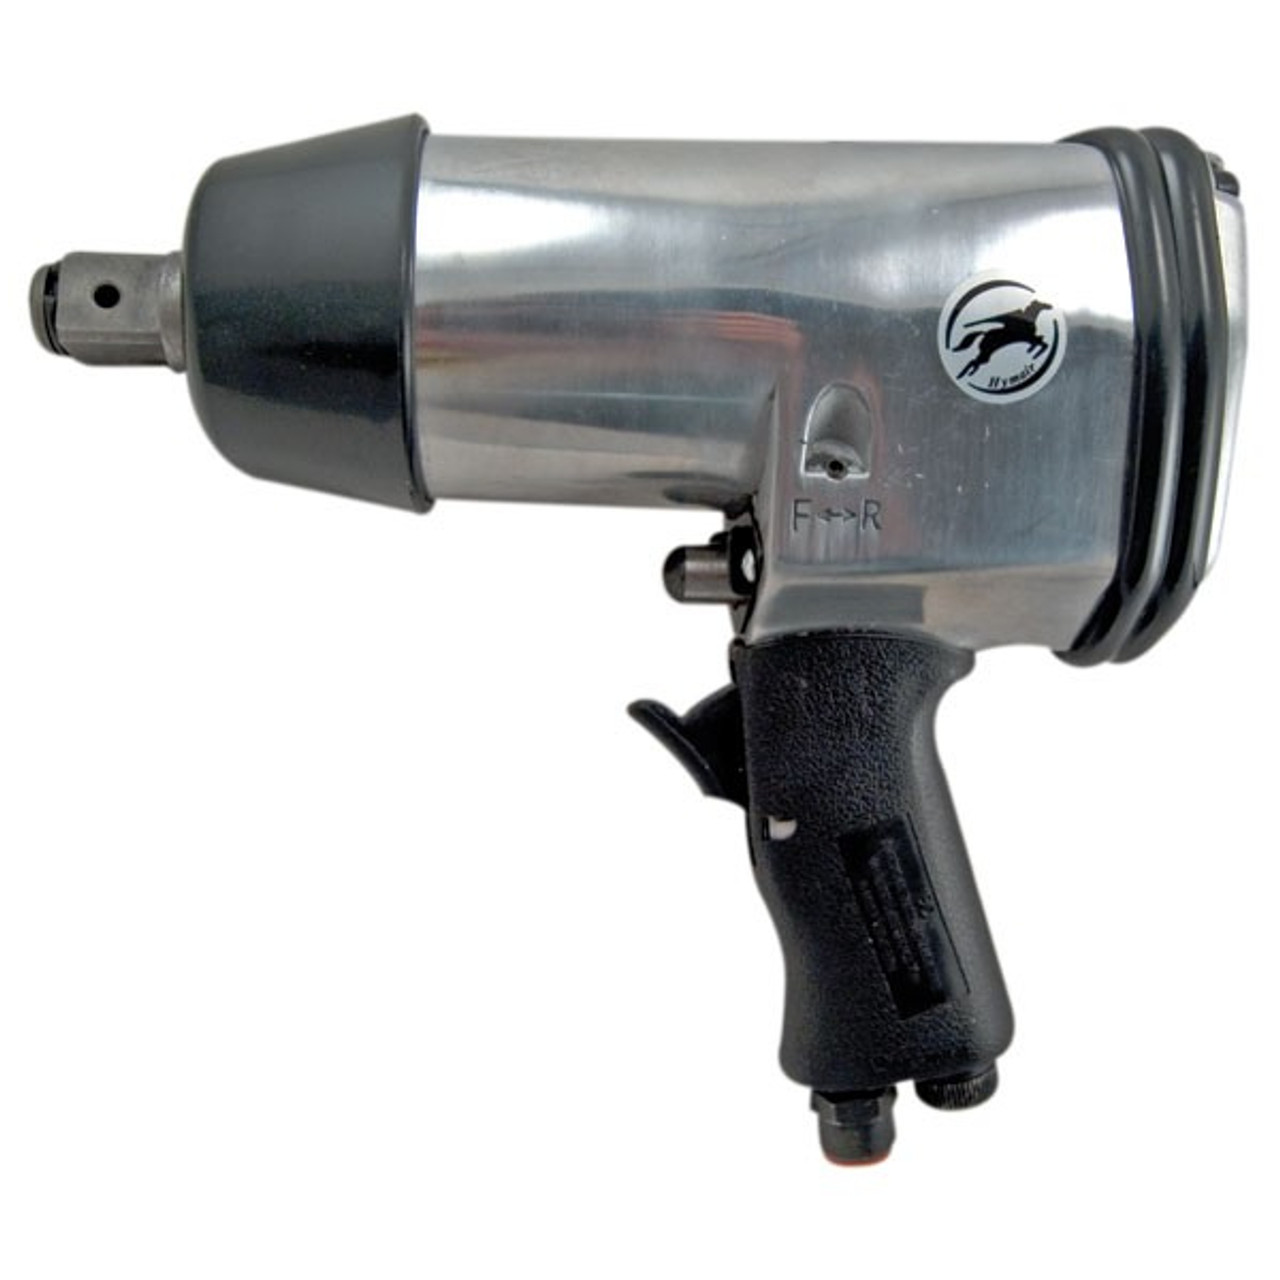 3/4" Impact Wrench ? Soft Grip AT-261SG